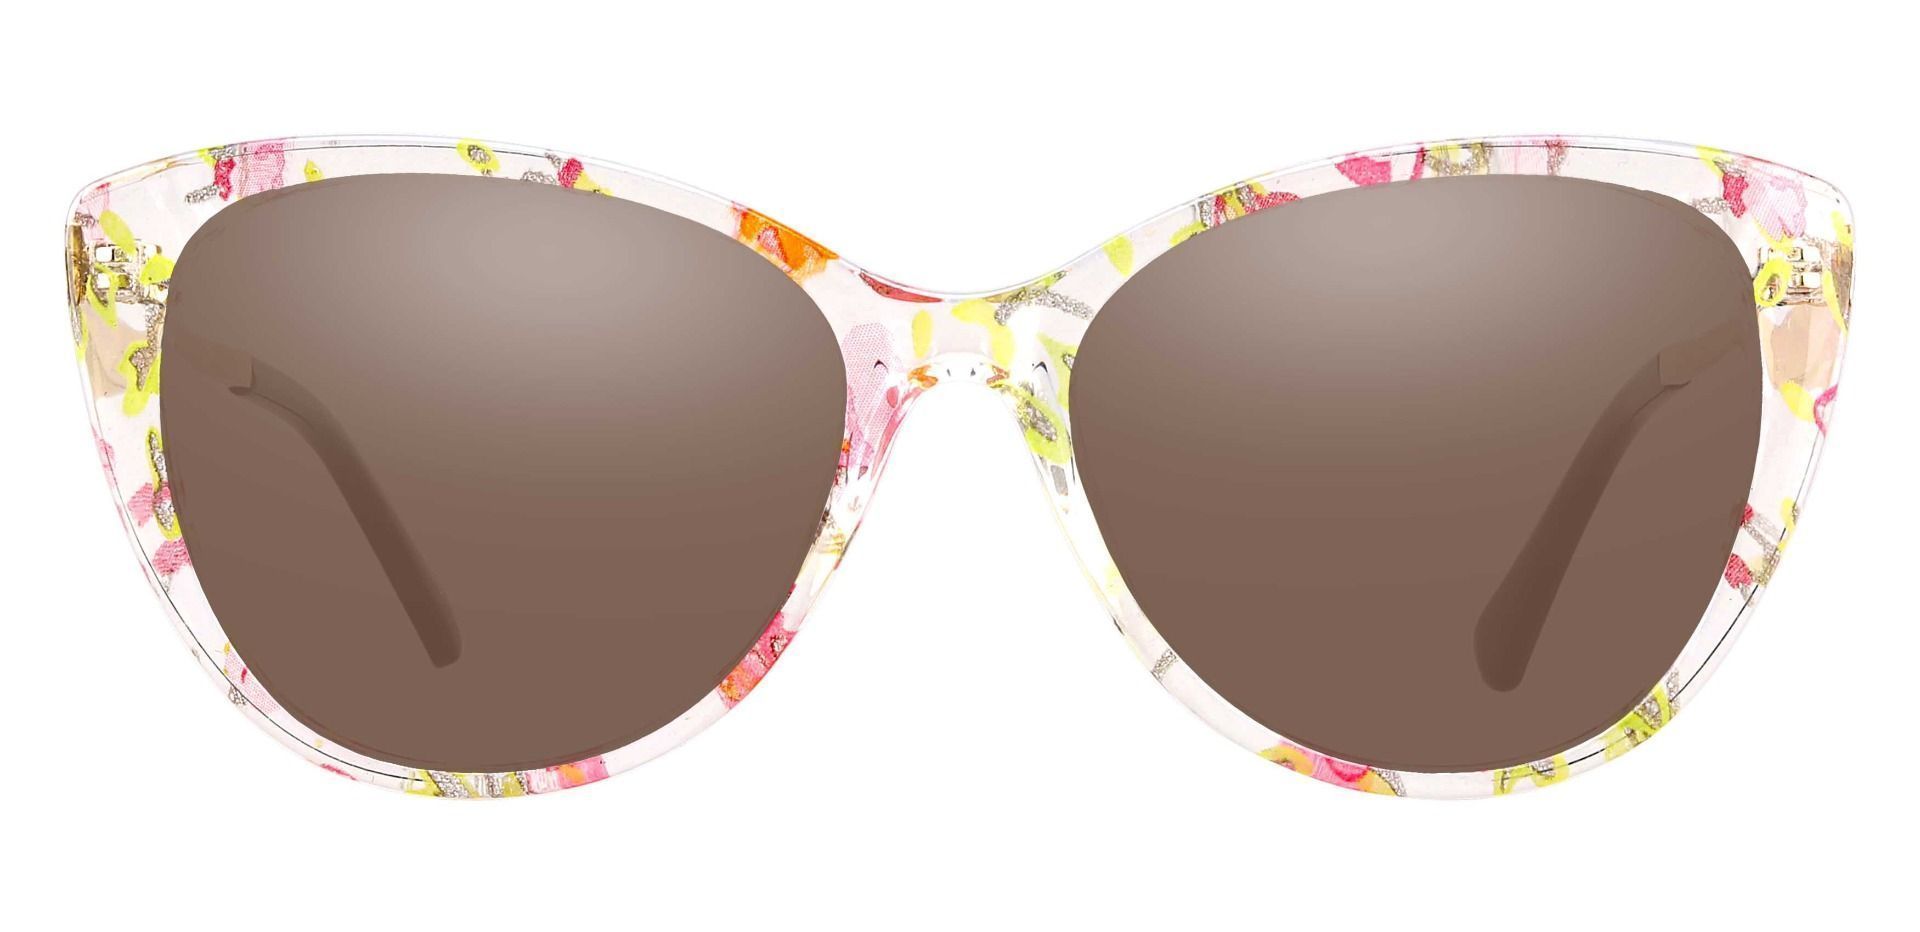 Roma Cat Eye Prescription Sunglasses - Floral Frame With Brown Lenses